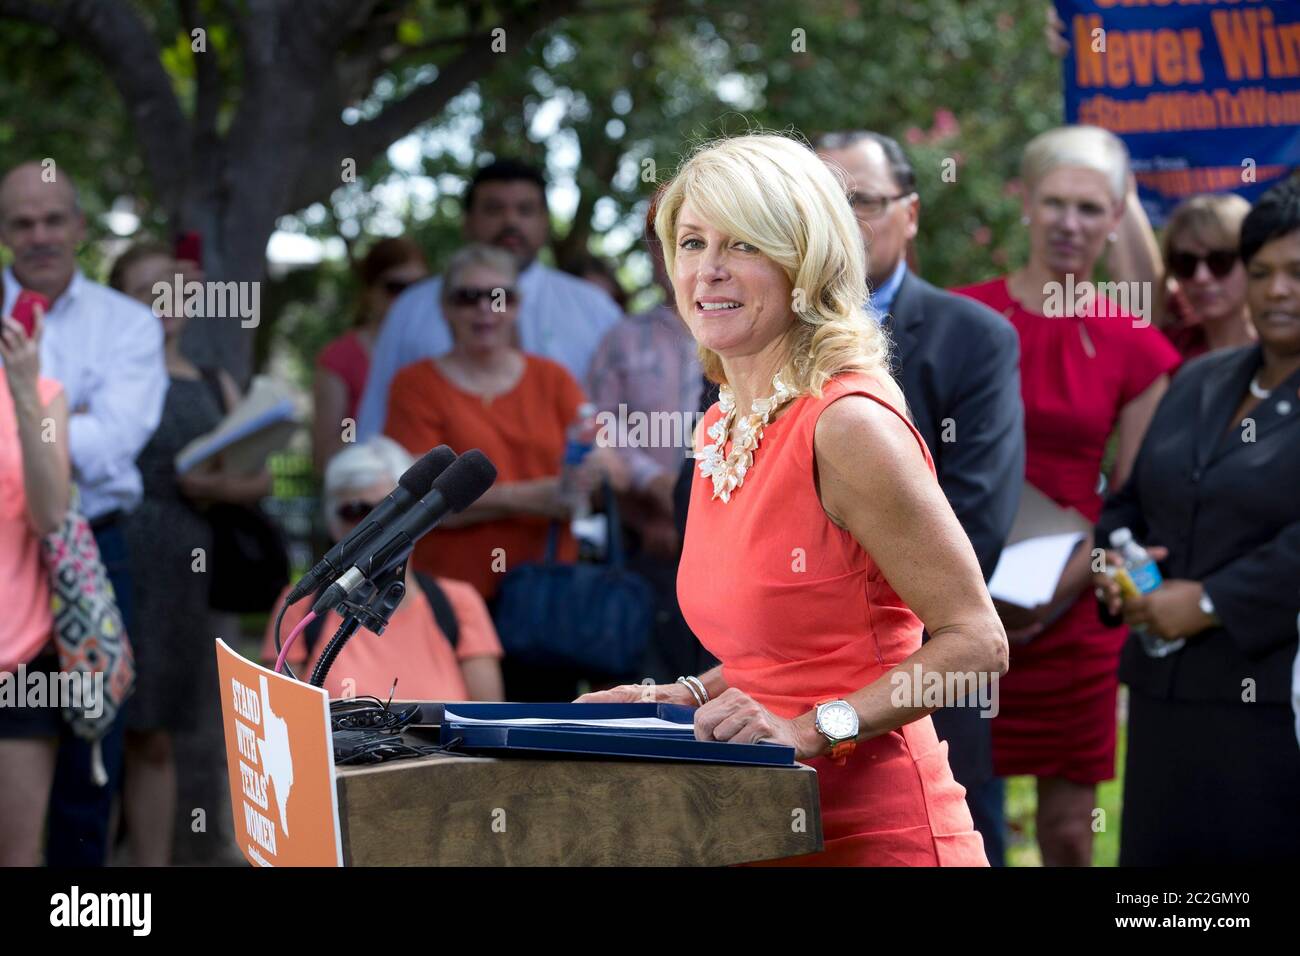 Austin Texas USA, July 2013: State Sen. Wendy Davis, D-Ft. Worth, speaks at a pro-choice rally as activists continue to descend on the Capitol while Texas lawmakers struggle to pass a bill limiting the number of abortion providers by increasing medical standards for clinics to the level of ambulatory surgical centers. Cecille Richards, president of Planned Parenthood, stands behind Davis wearing a red dress. ©Bob Daemmrich Stock Photo